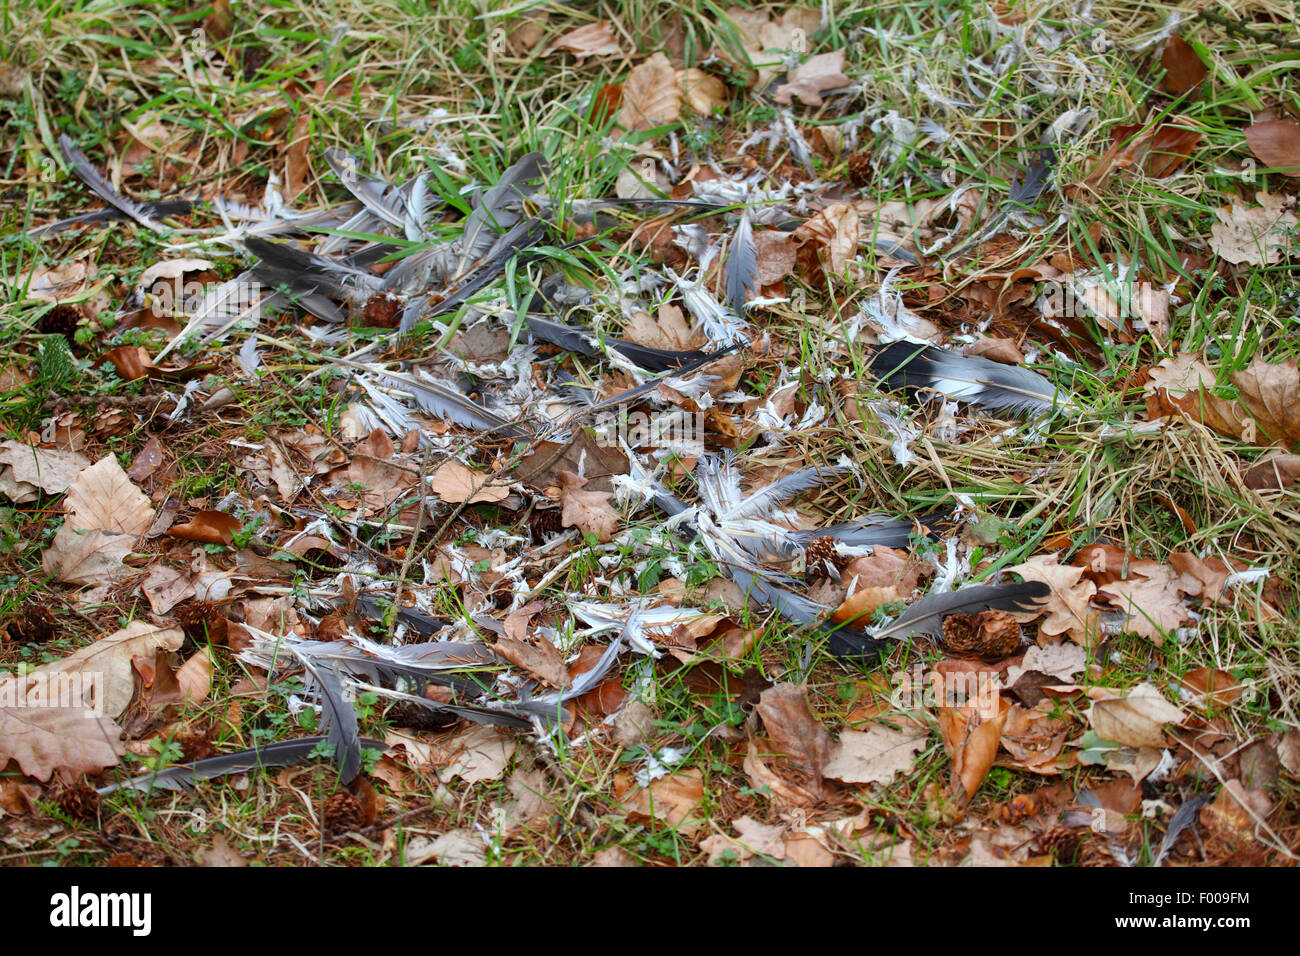 plucking, sparrowhawk or goshawk has captured a wood pigeon, plucked and eaten, Germany Stock Photo